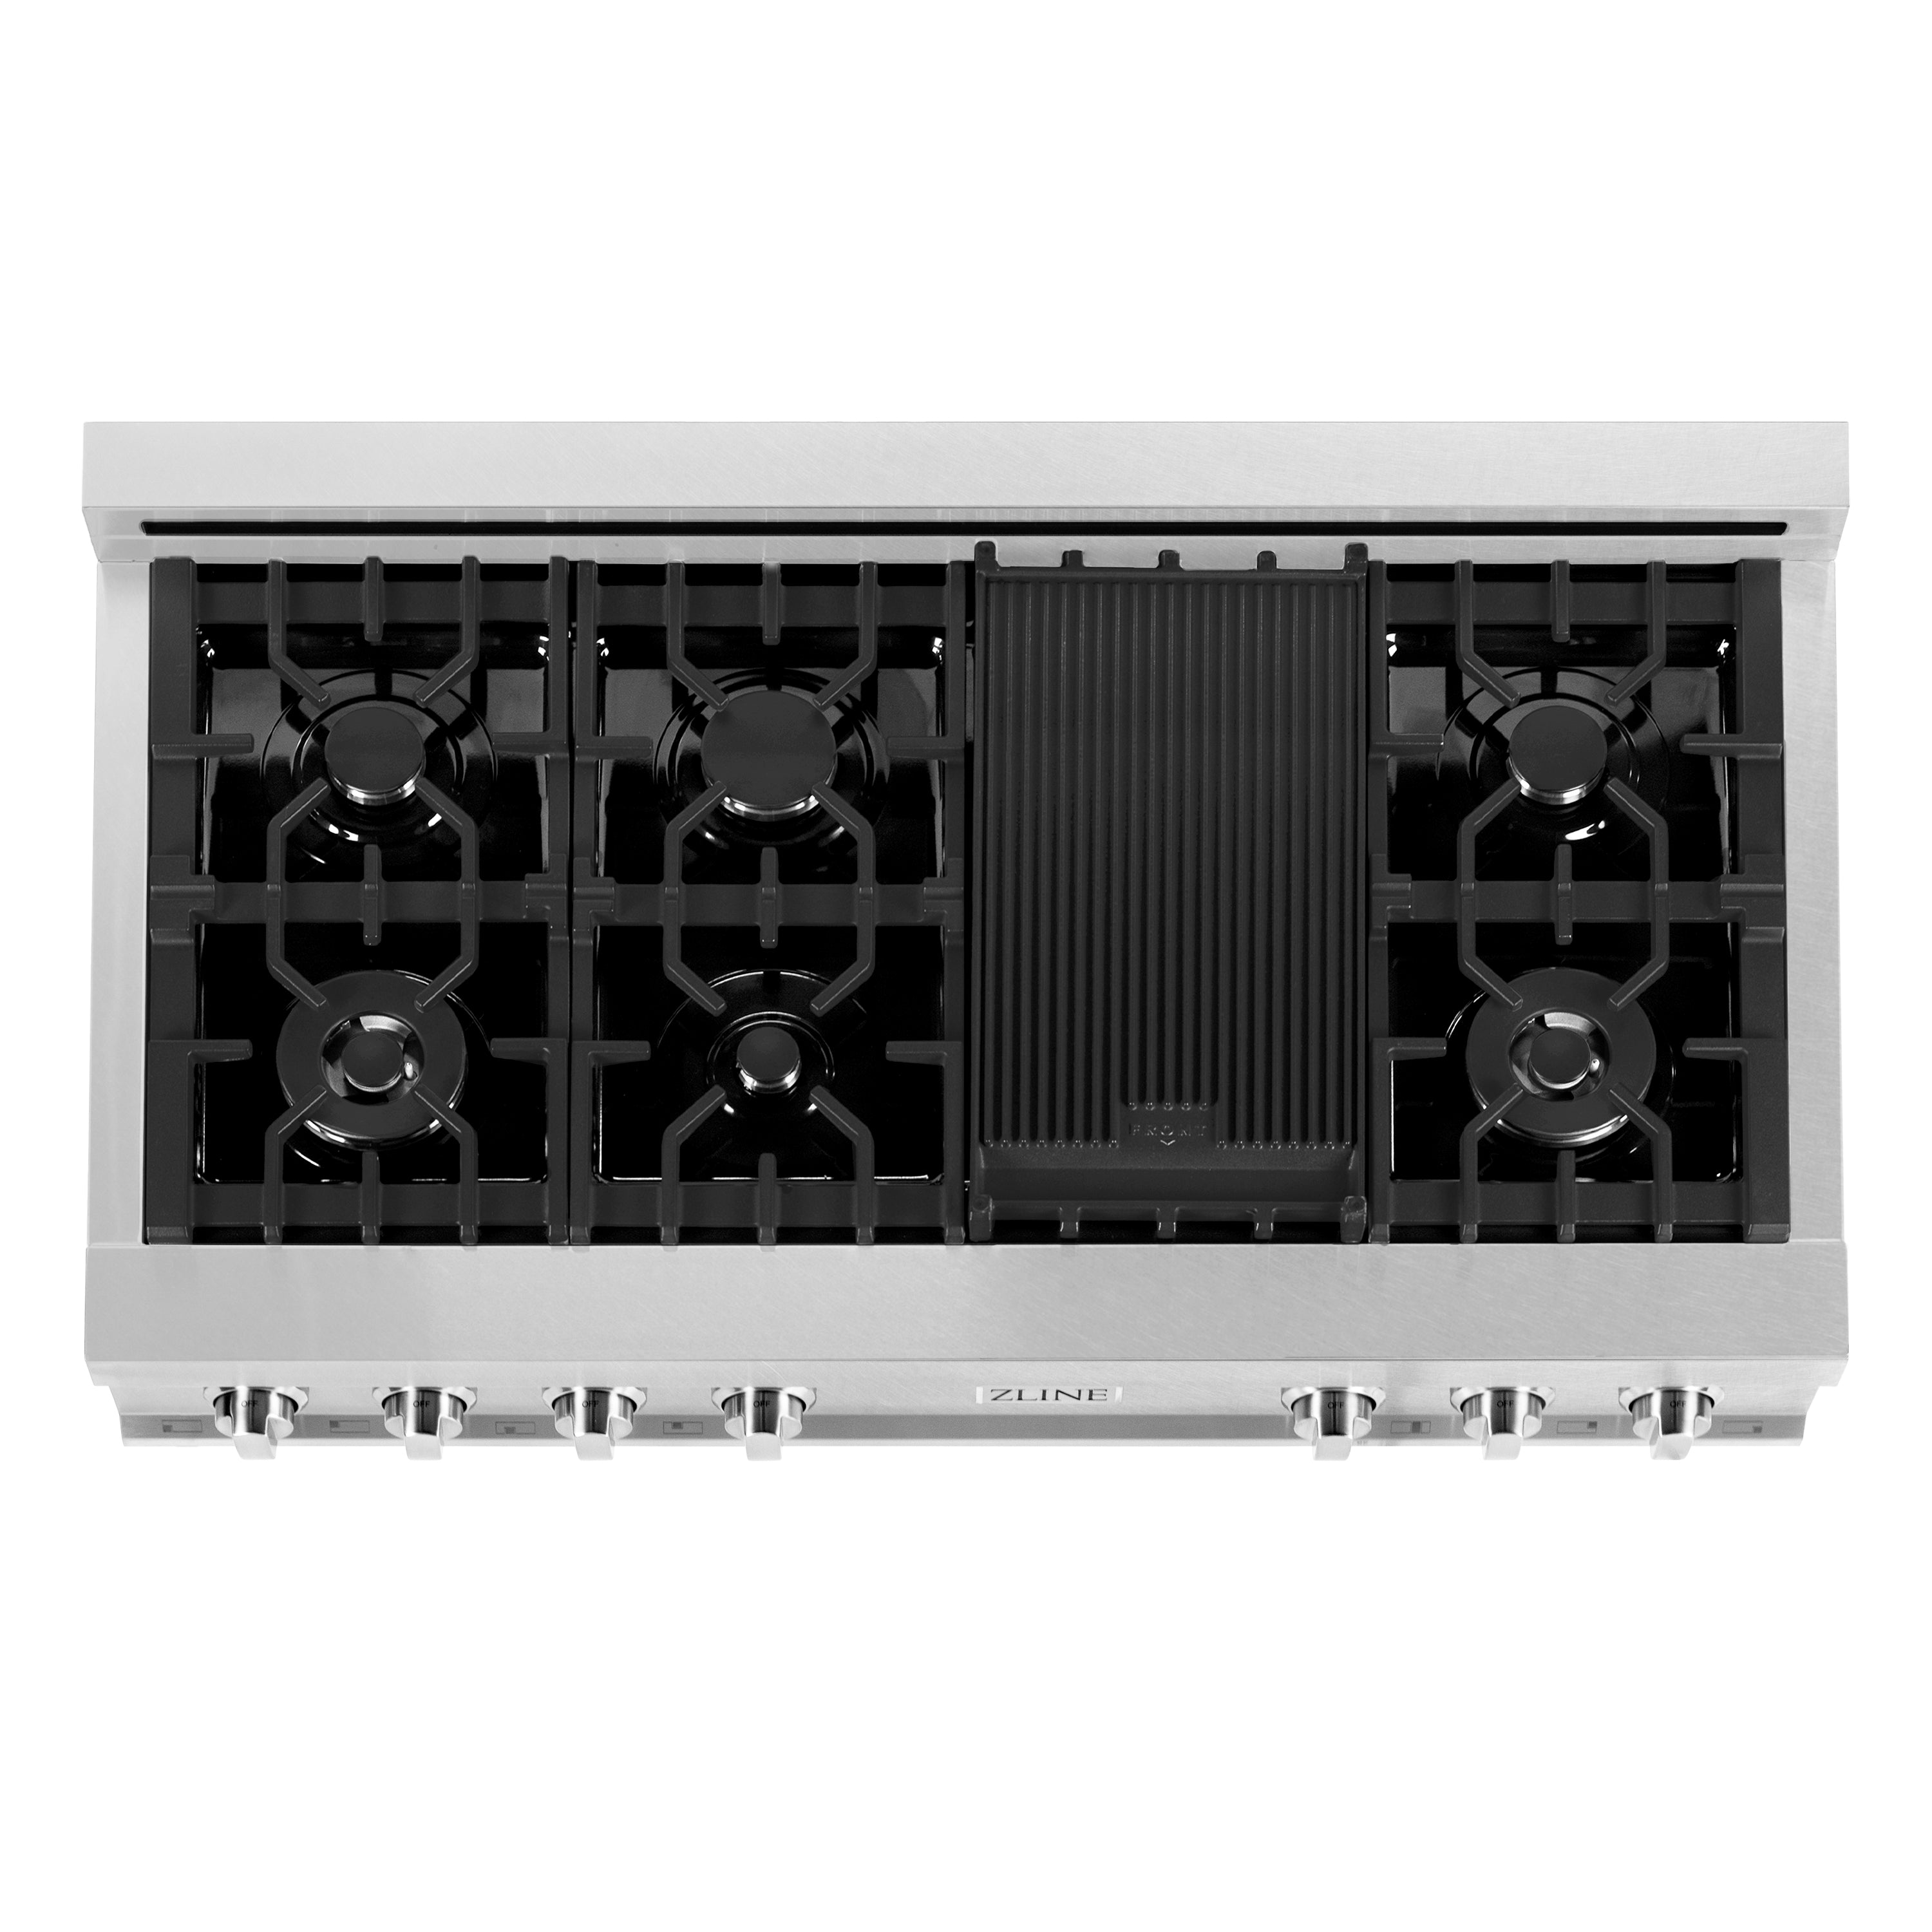 ZLINE 48" Porcelain Gas Stovetop in Fingerprint Resistant Stainless Steel with 7 Gas Burners and Griddle (RTS-48)